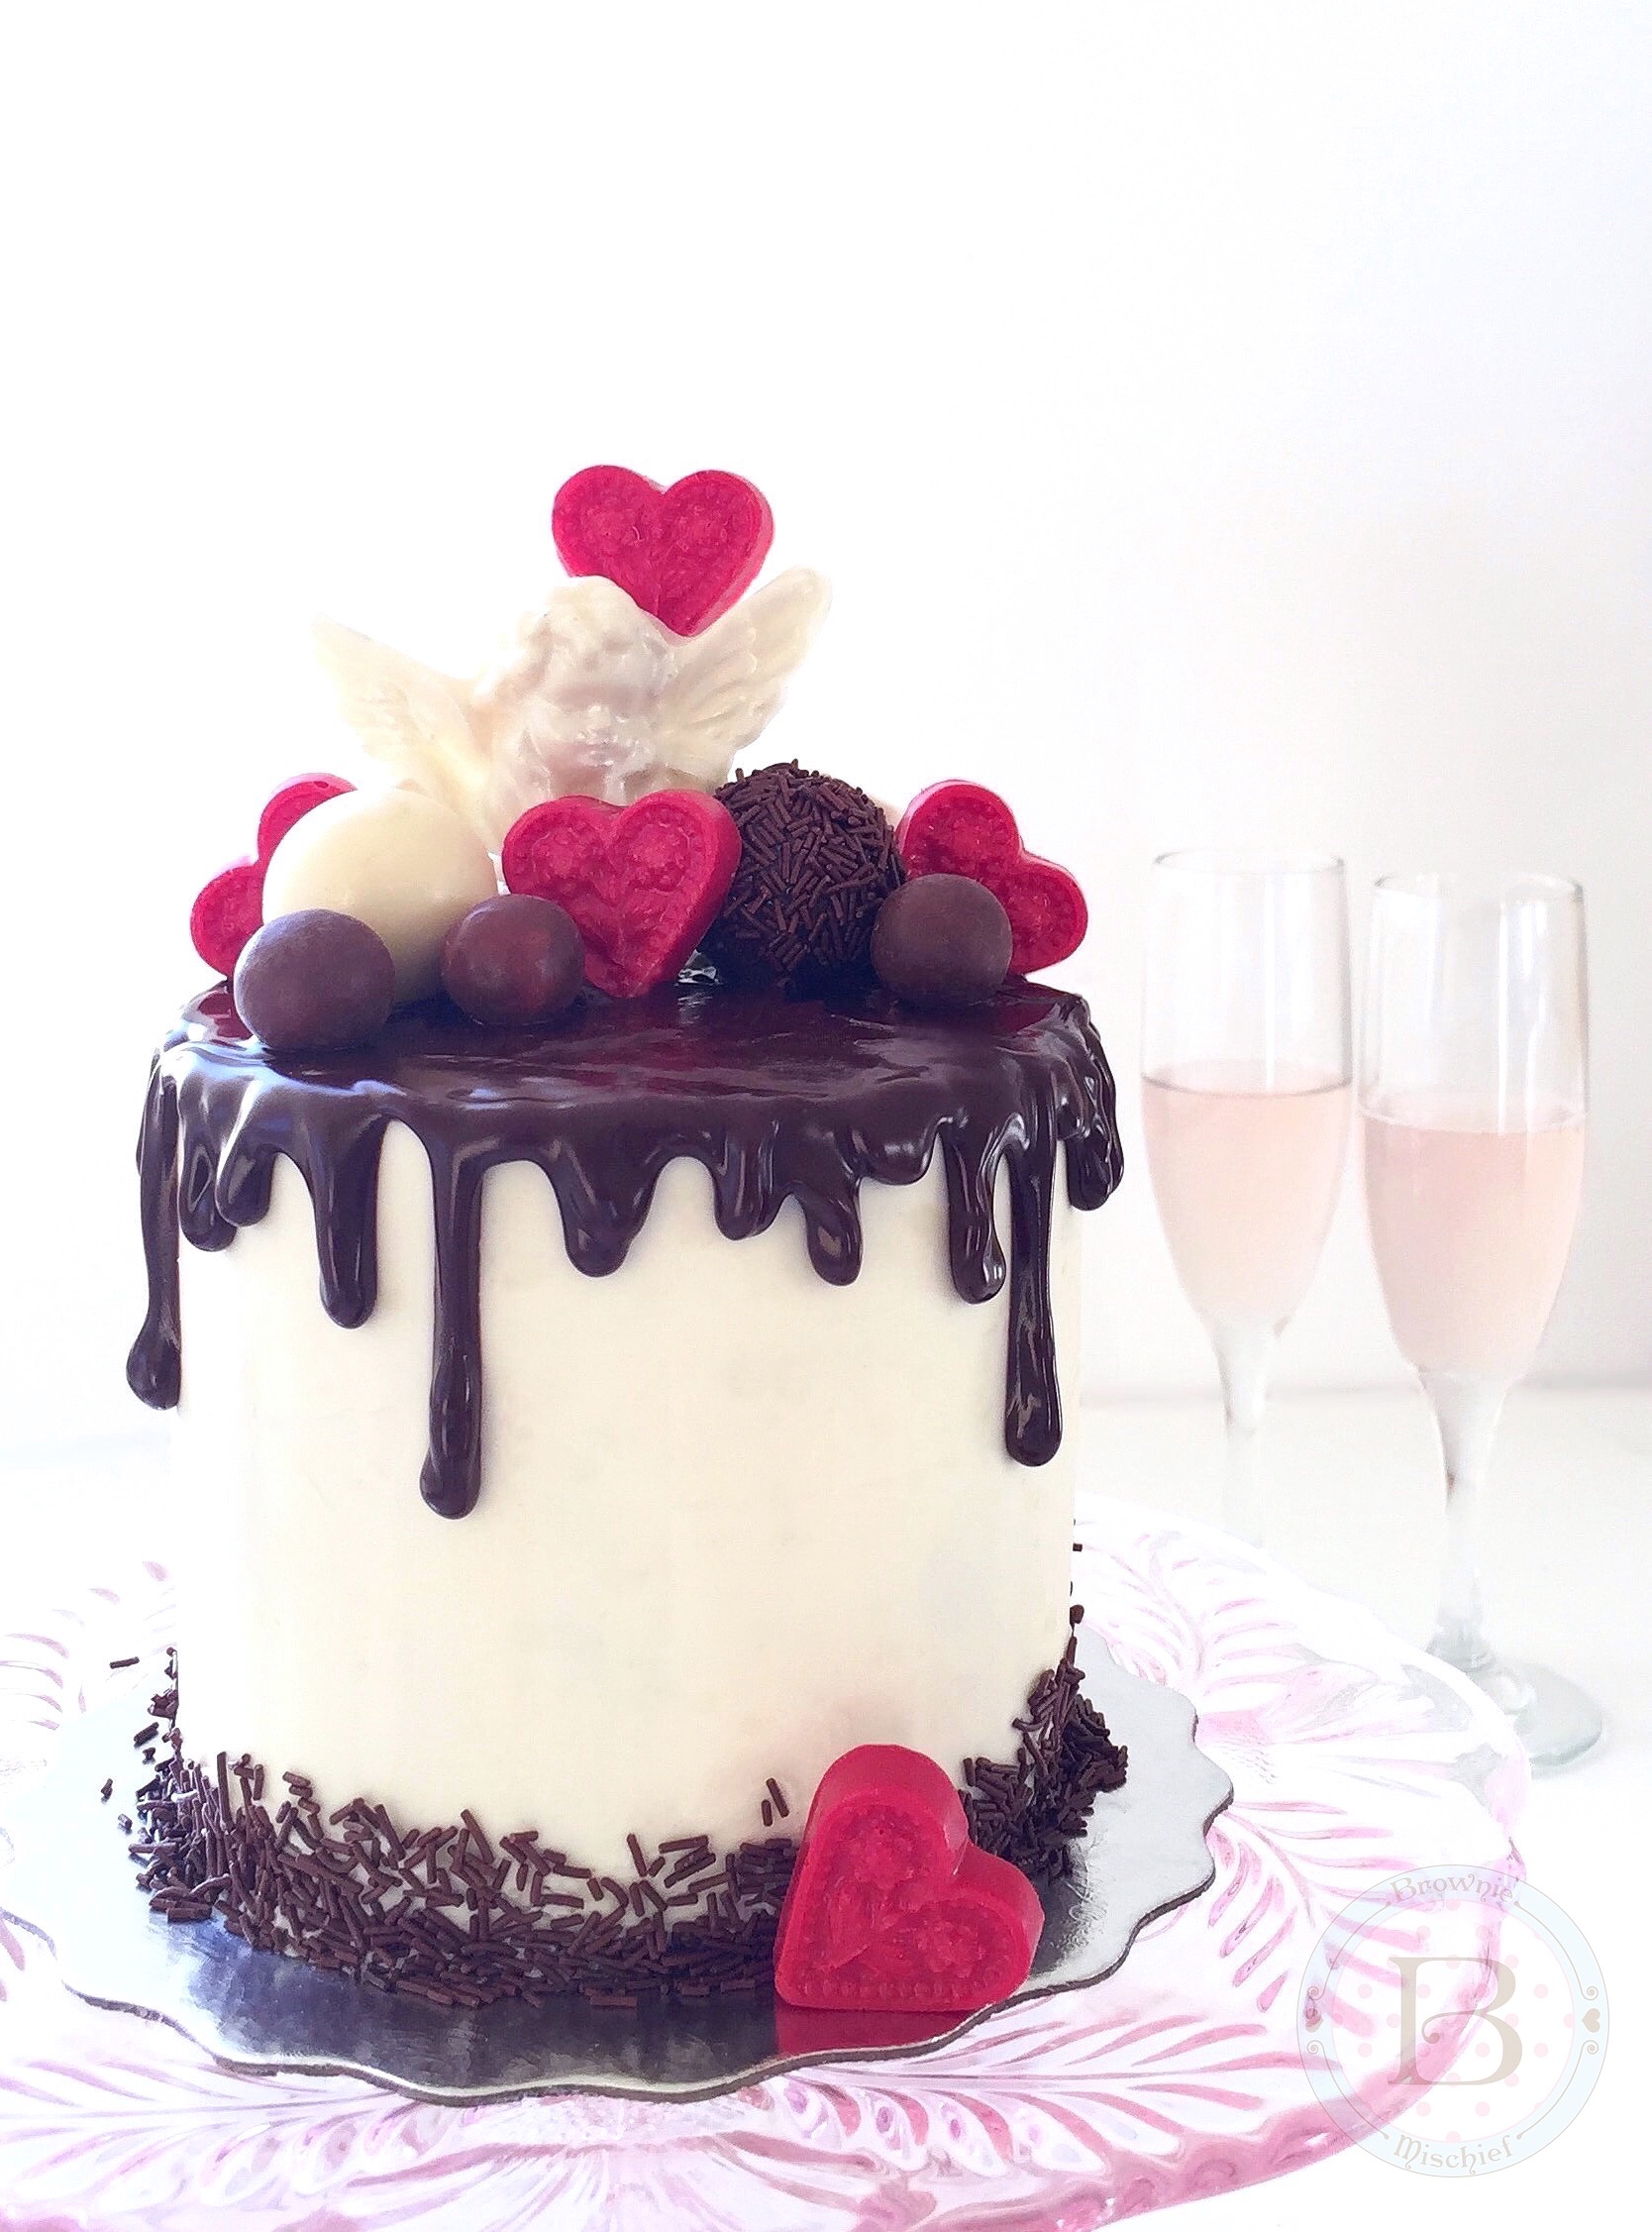 Chocolate Lovers' Valentine Drip Cake for Two